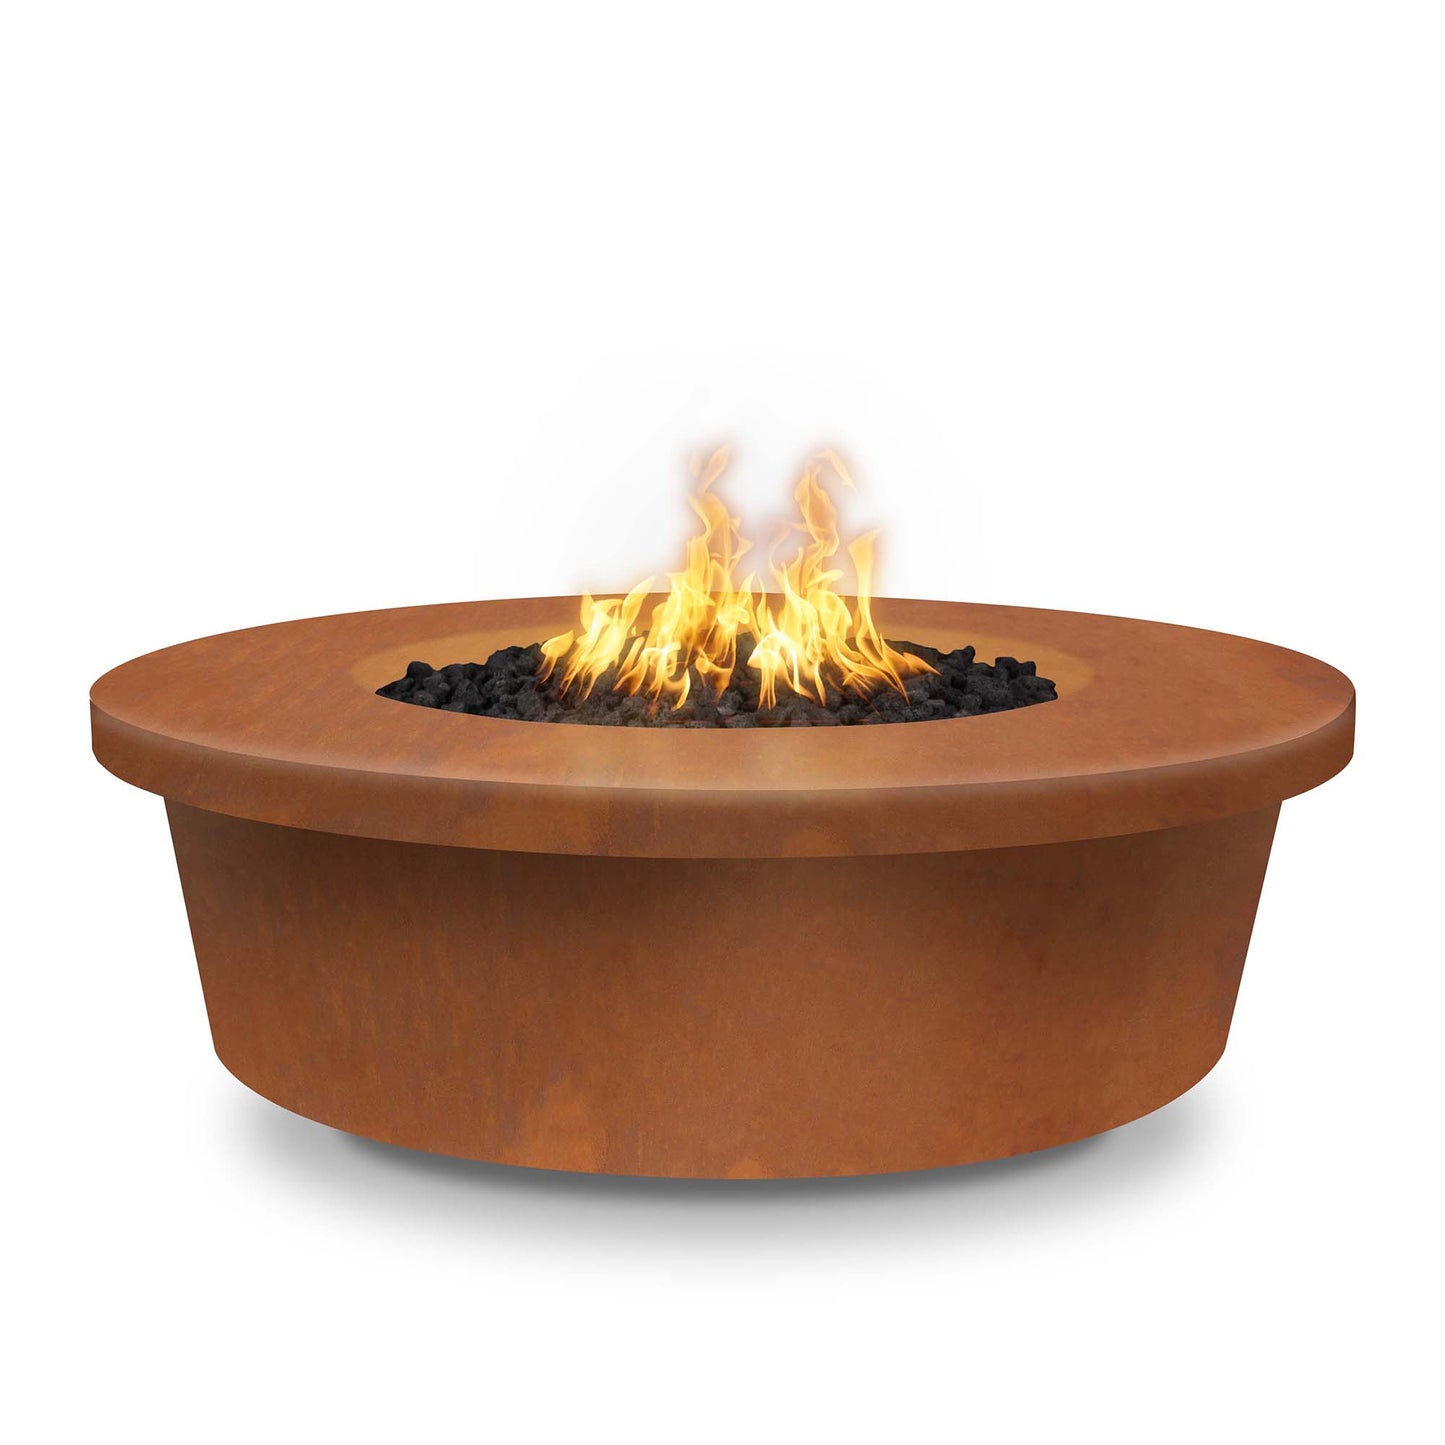 The Outdoor Plus Round Tempe 48" Stainless Steel Natural Gas Fire Pit with Match Lit with Flame Sense Ignition